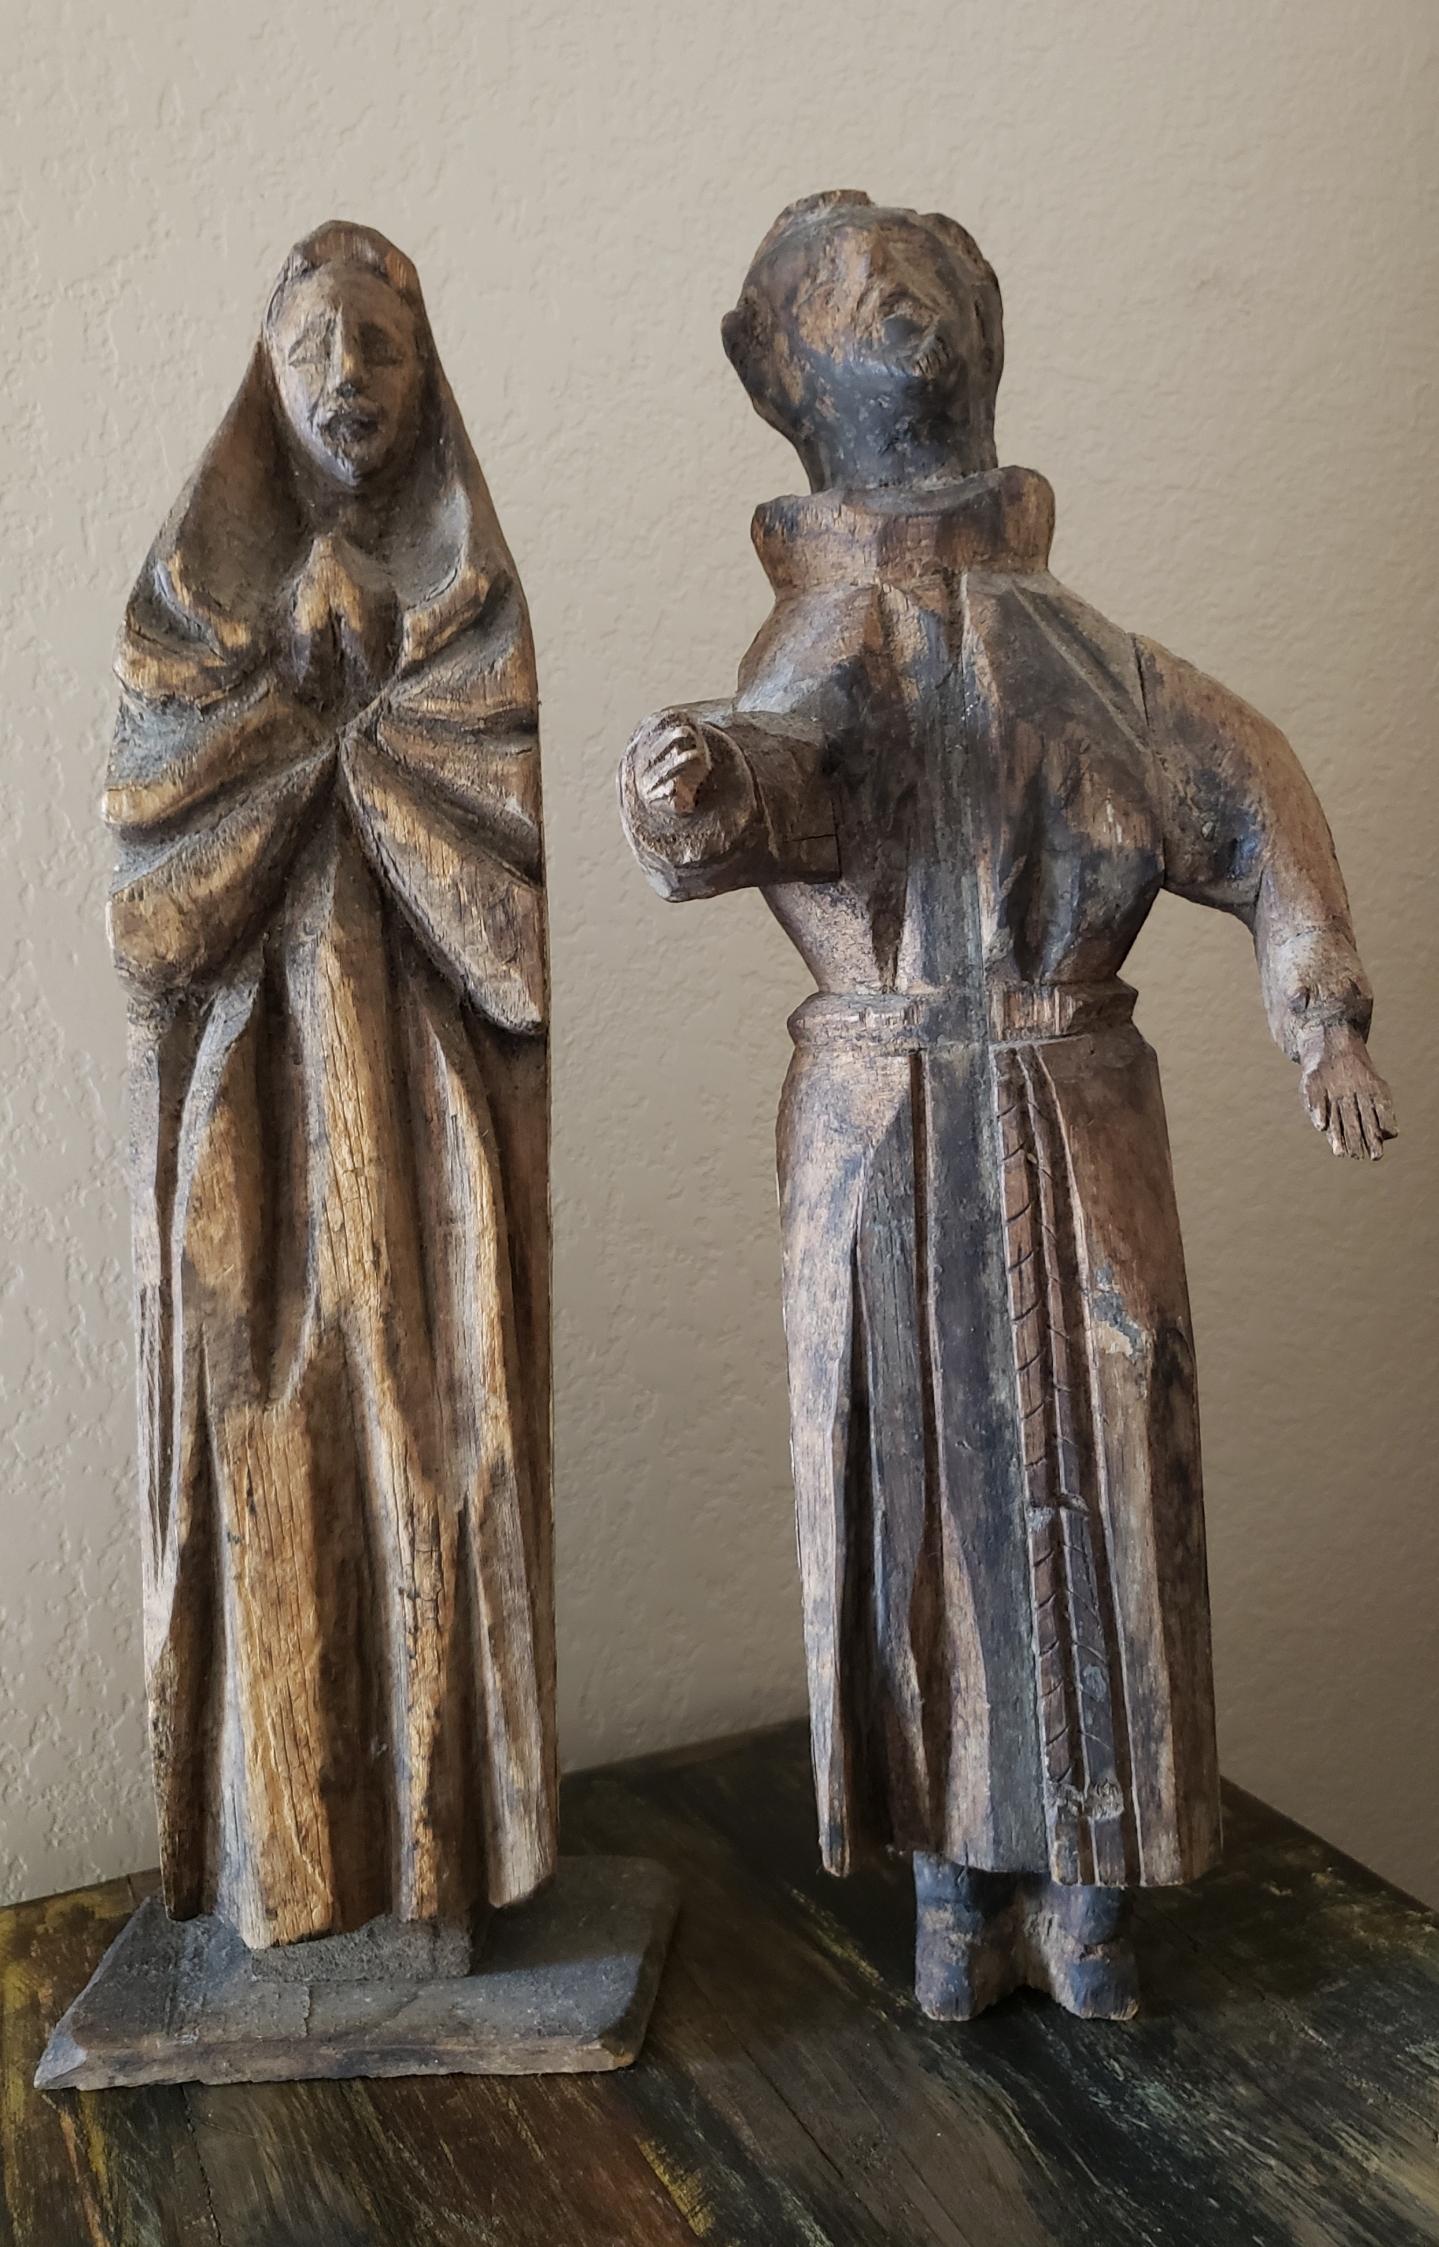 A rare one-of-a-kind pair of large rustic antique European hand carved stripped and scraped wood Santo church altar figures.

18th/early 19th century, primitive hand-crafted construction, finely detailed and sculpted, depicting Saint Francis of